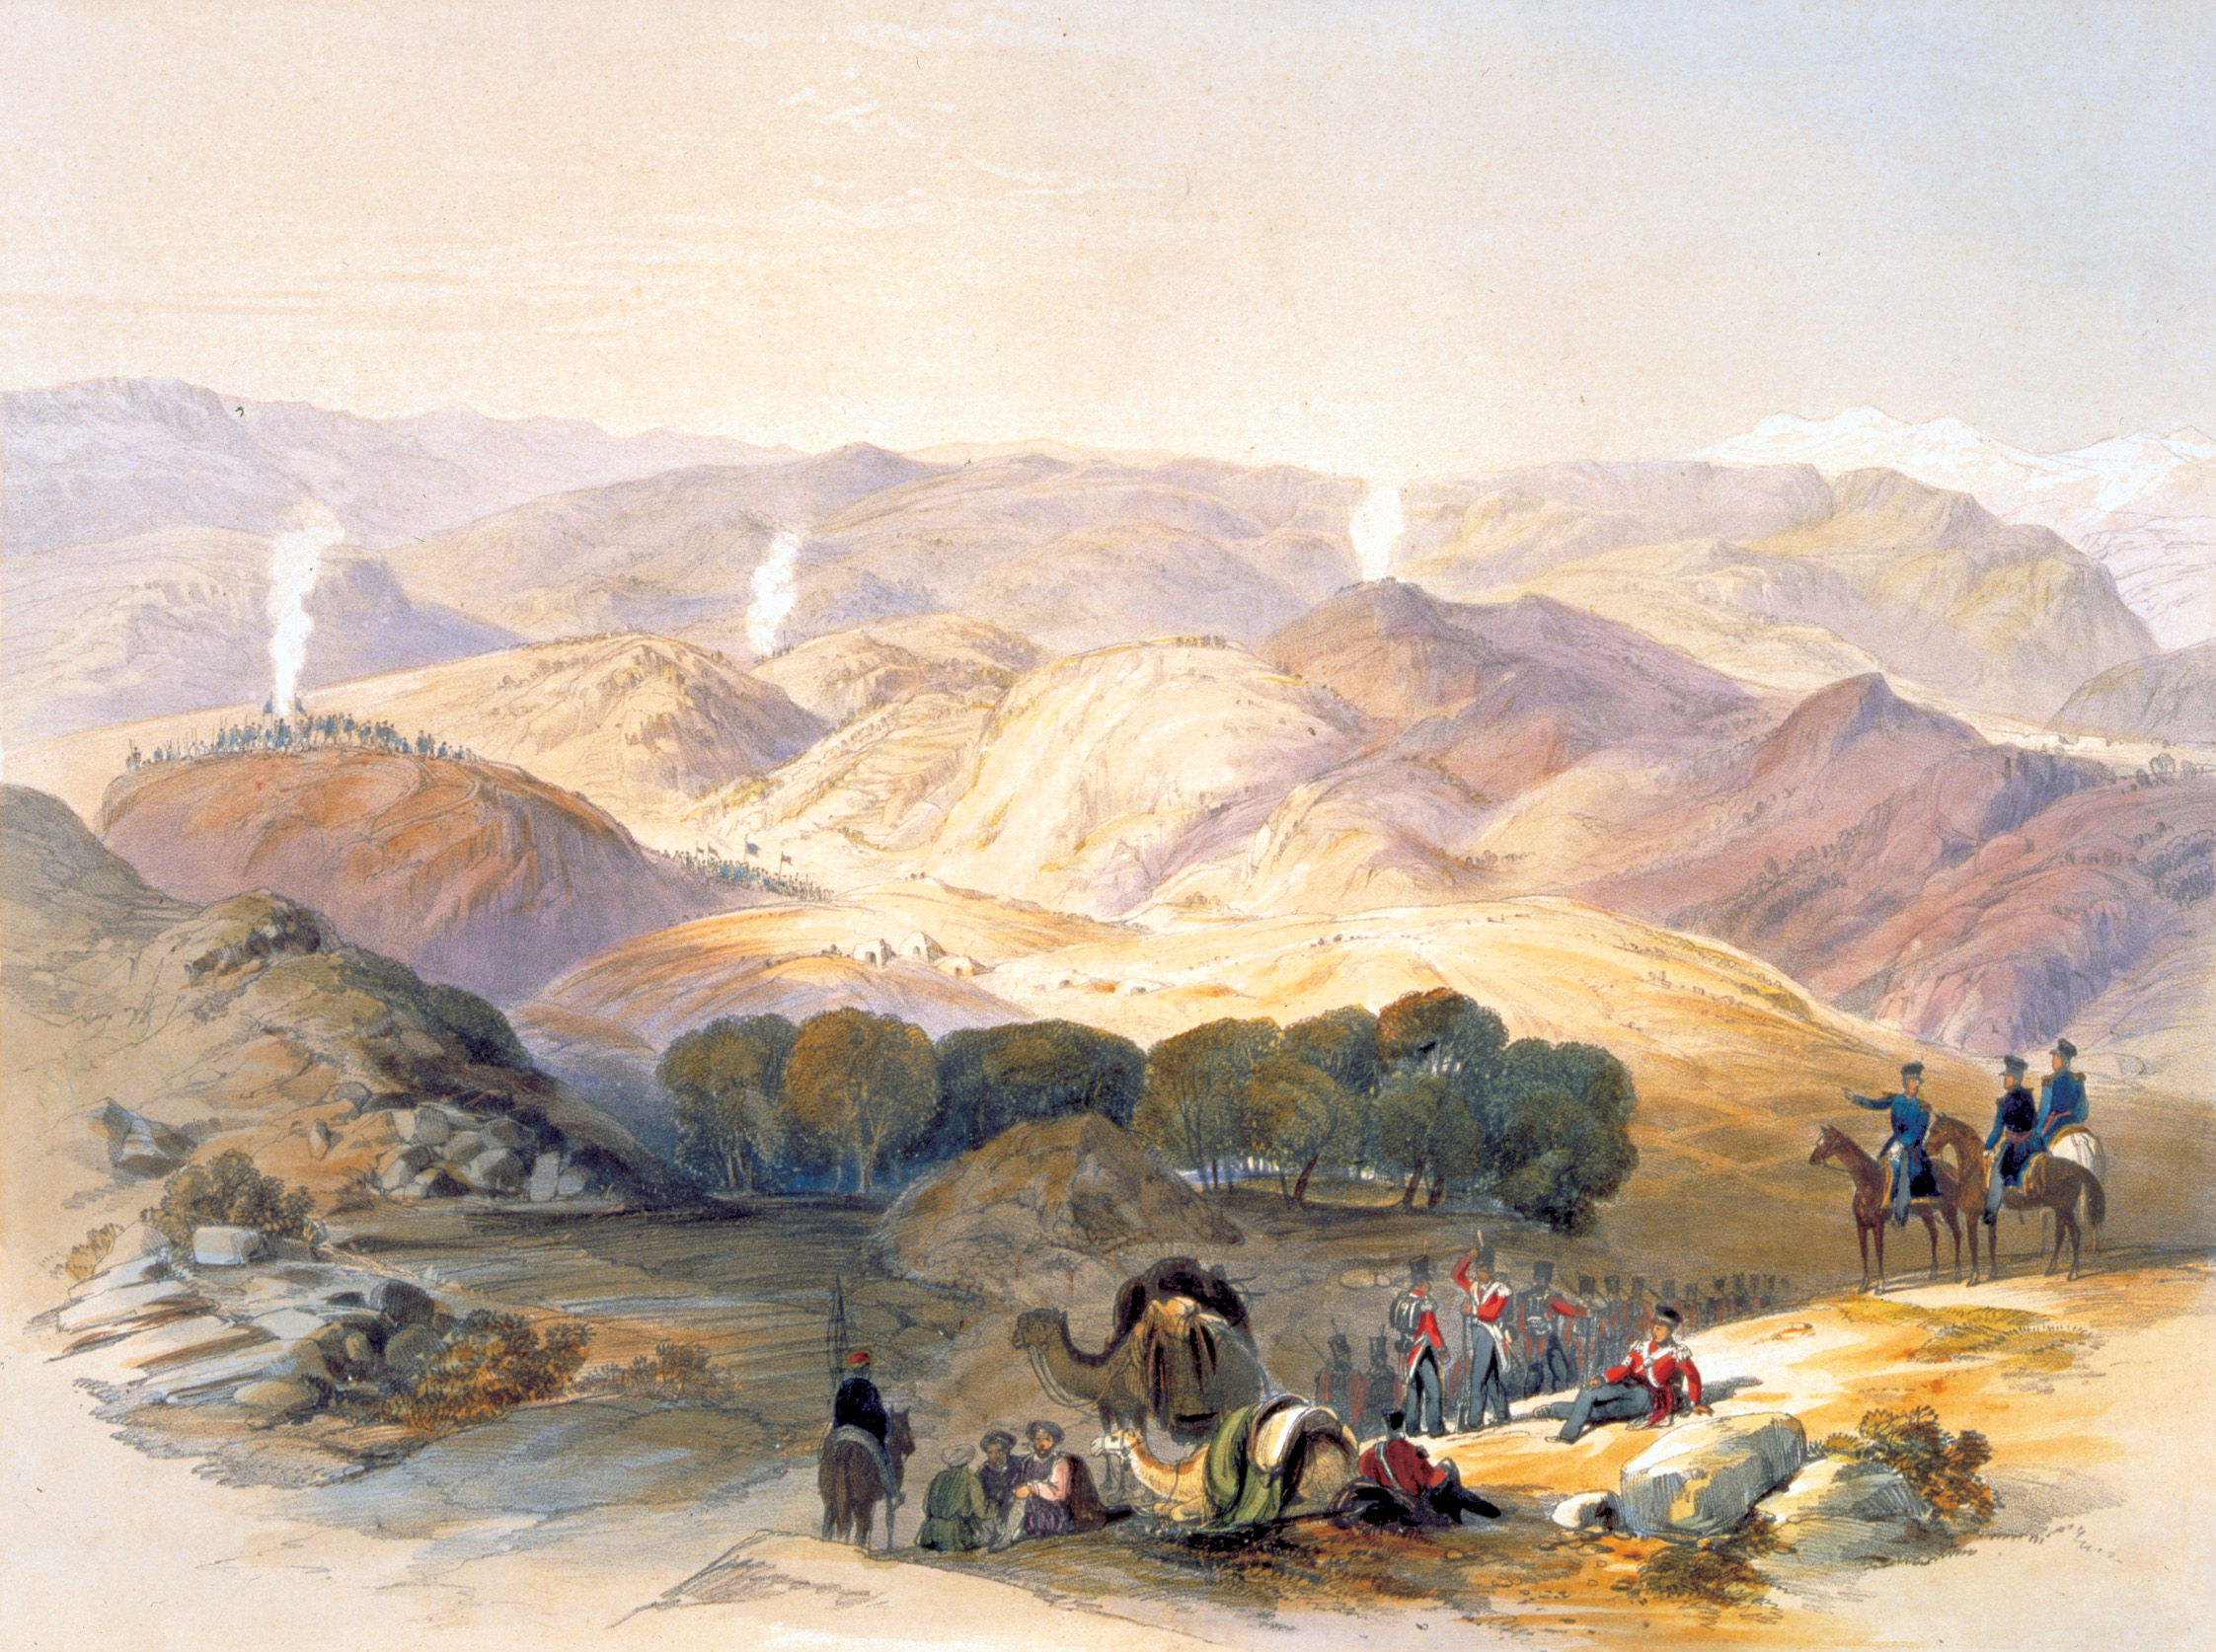 An 1848 depiction of Afghanistan made the region appear pastoral and inviting, far from its reality to the foreign armies.